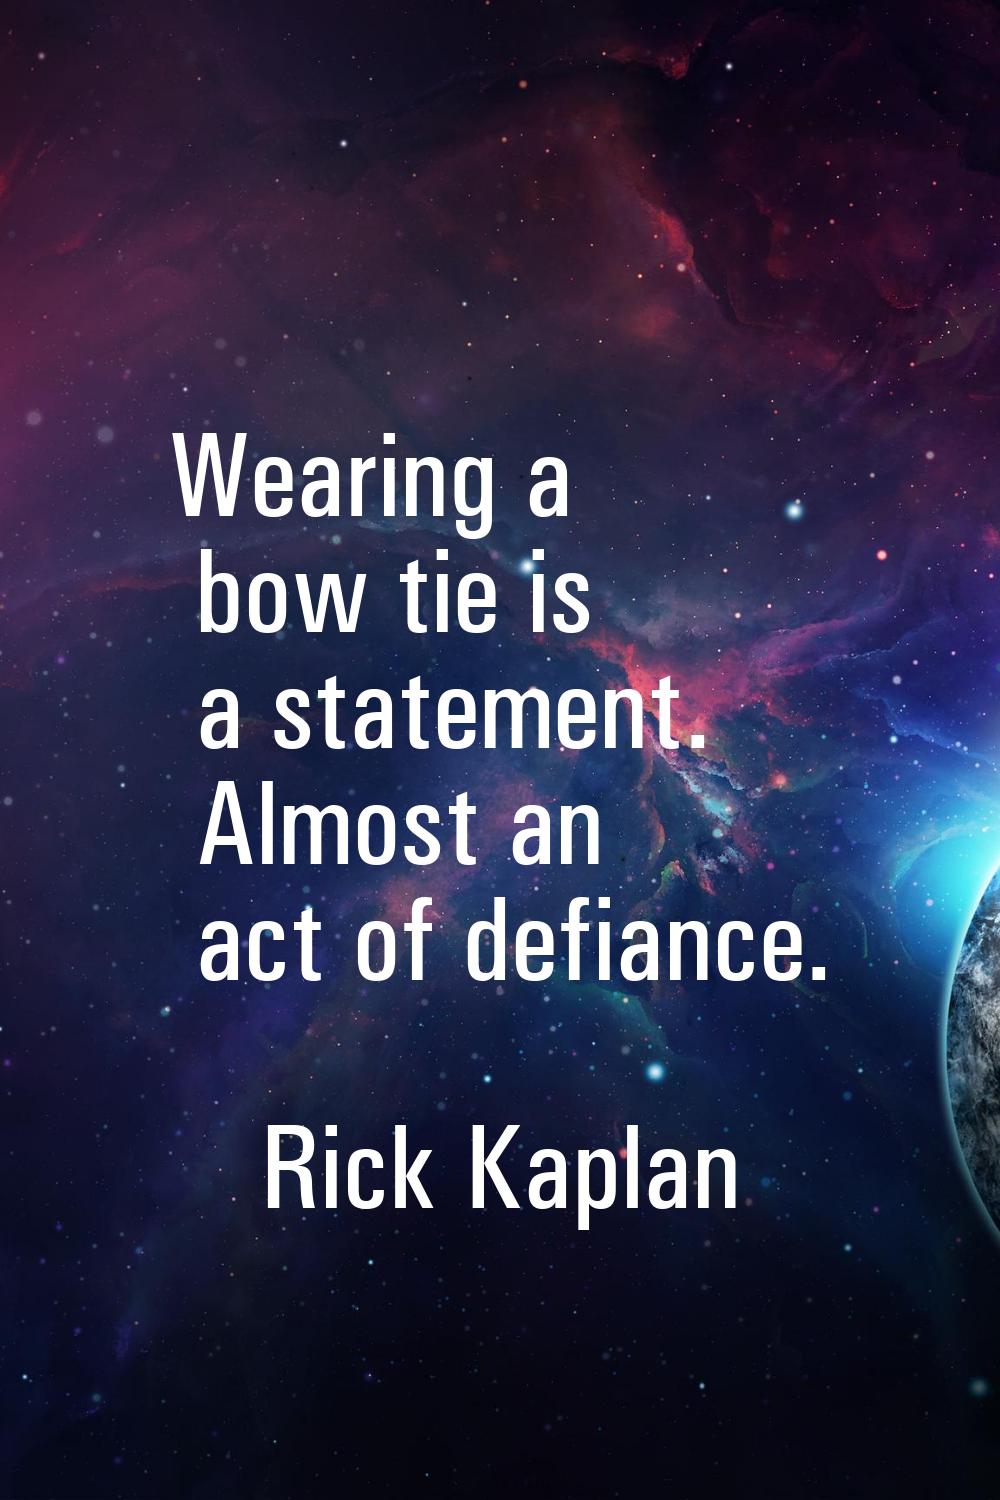 Wearing a bow tie is a statement. Almost an act of defiance.